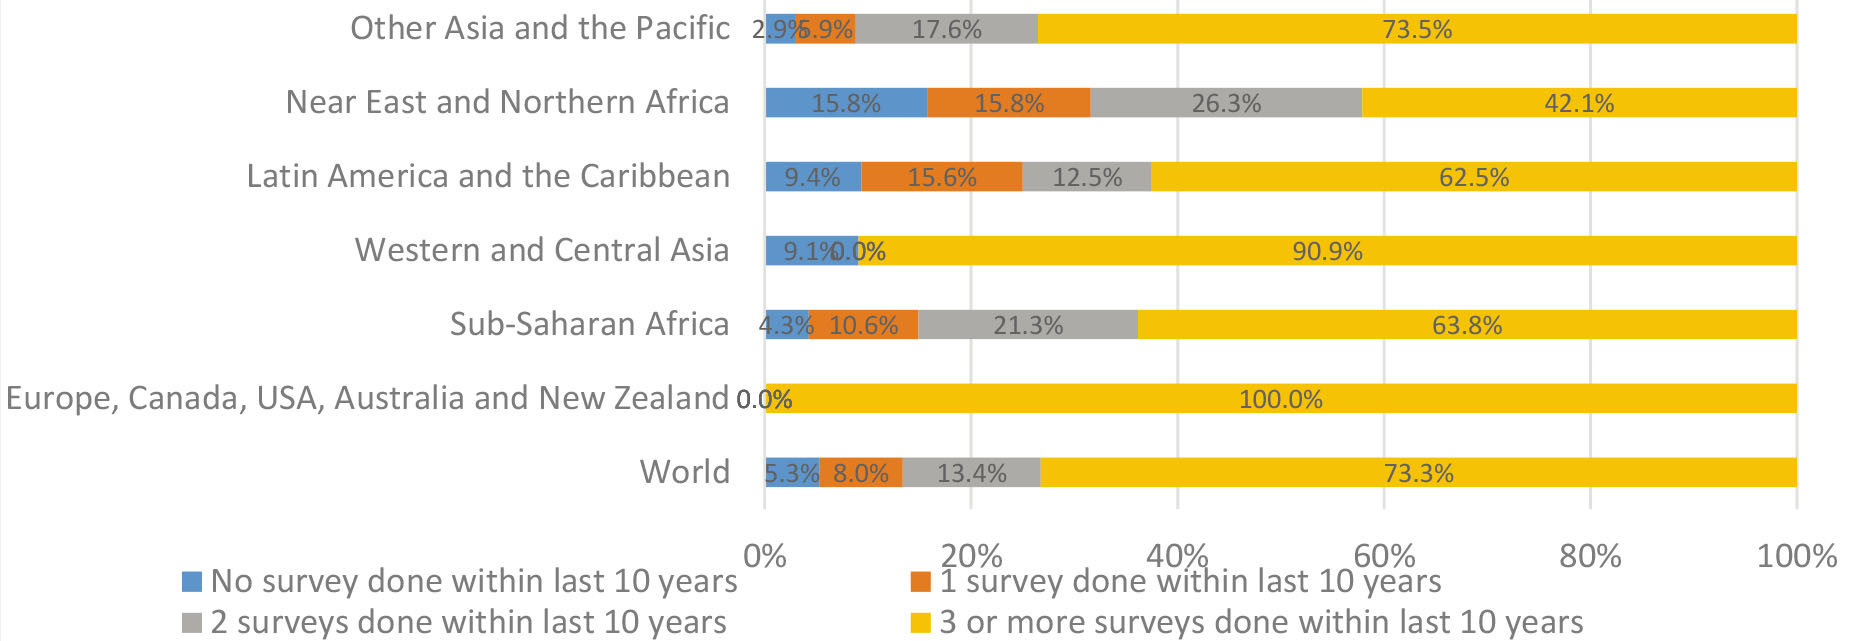 Percentage of countries according to the frequency of their surveys on household income, consumption and expenditure in the last 10 years (period covering 2011–2020), per frequency and region (Source: World Bank, Statistical Performance Indicators Database, 2021).